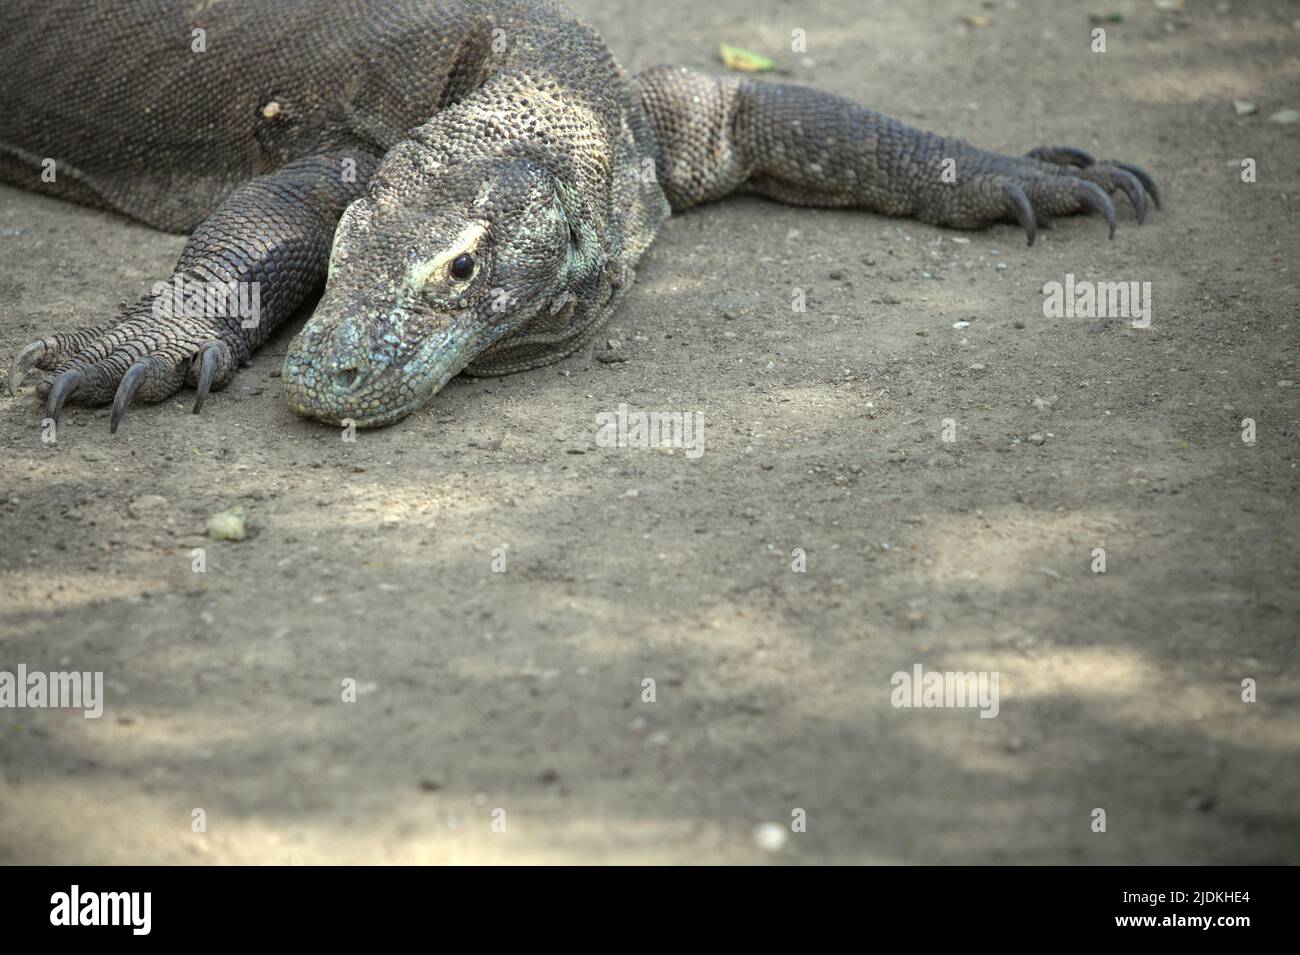 A komodo dragon (Varanus komodoensis) in Rinca Island, a part of Komodo National Park in West Manggarai, East Nusa Tenggara, Indonesia. The world's largest lizard, komodo dragons reach a body mass up to 90 kg and a length of 3 meters, according to a team of scientists led by Brandon S. Boyd in their paper published in 2021 by Foot & Ankle Orthopaedics. Because of their large size, these lizards feed on prey that equal or exceed their own mass. Stock Photo